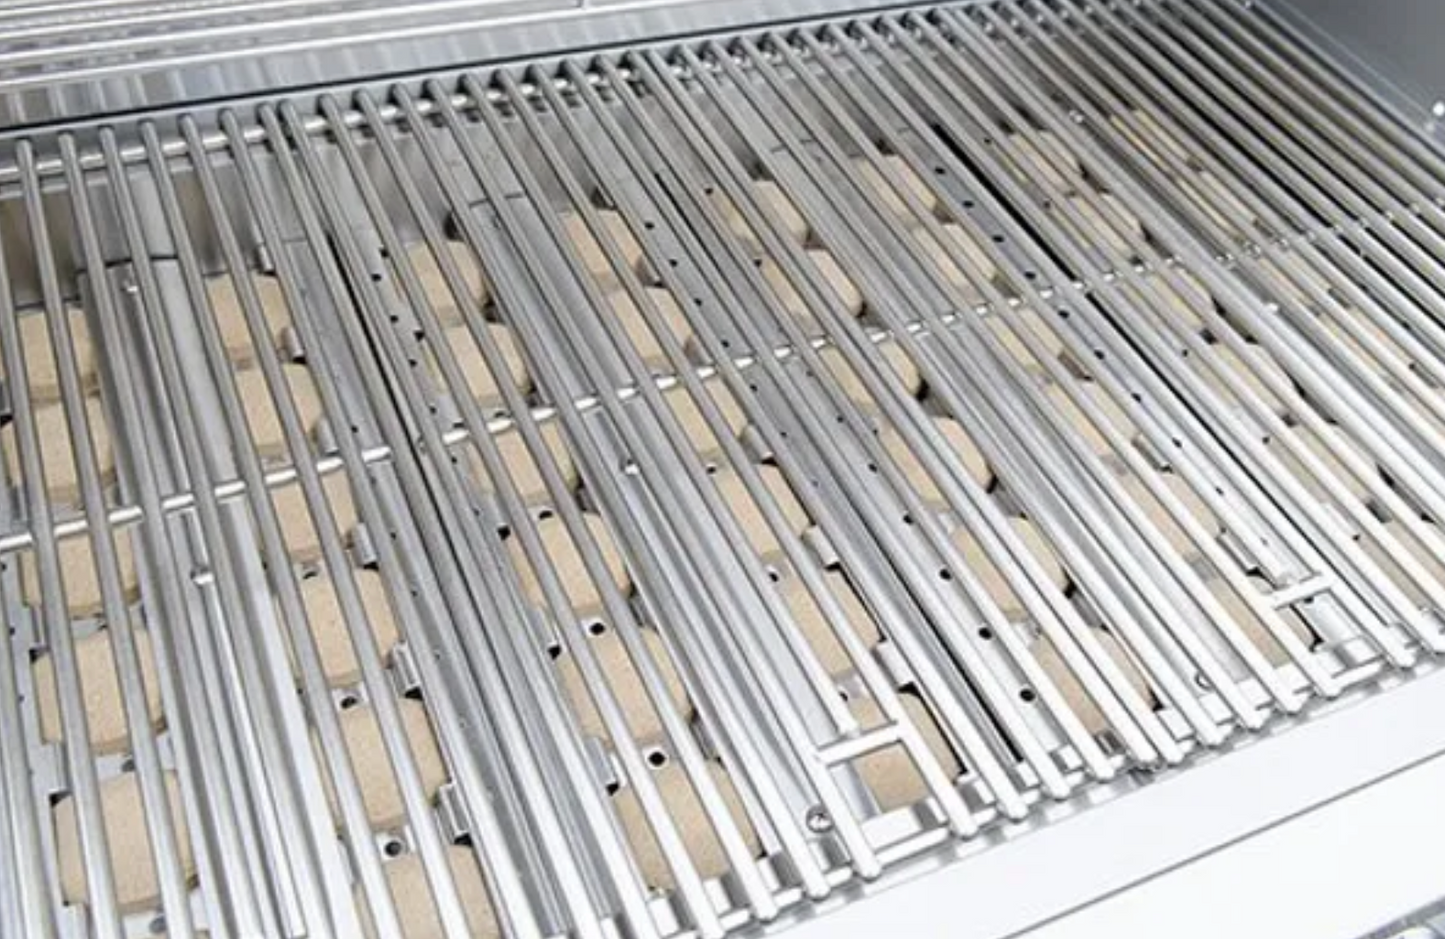 Grills Stainless Steel Cooking Grid Used On All 3, 4, and 5 Burner Grills